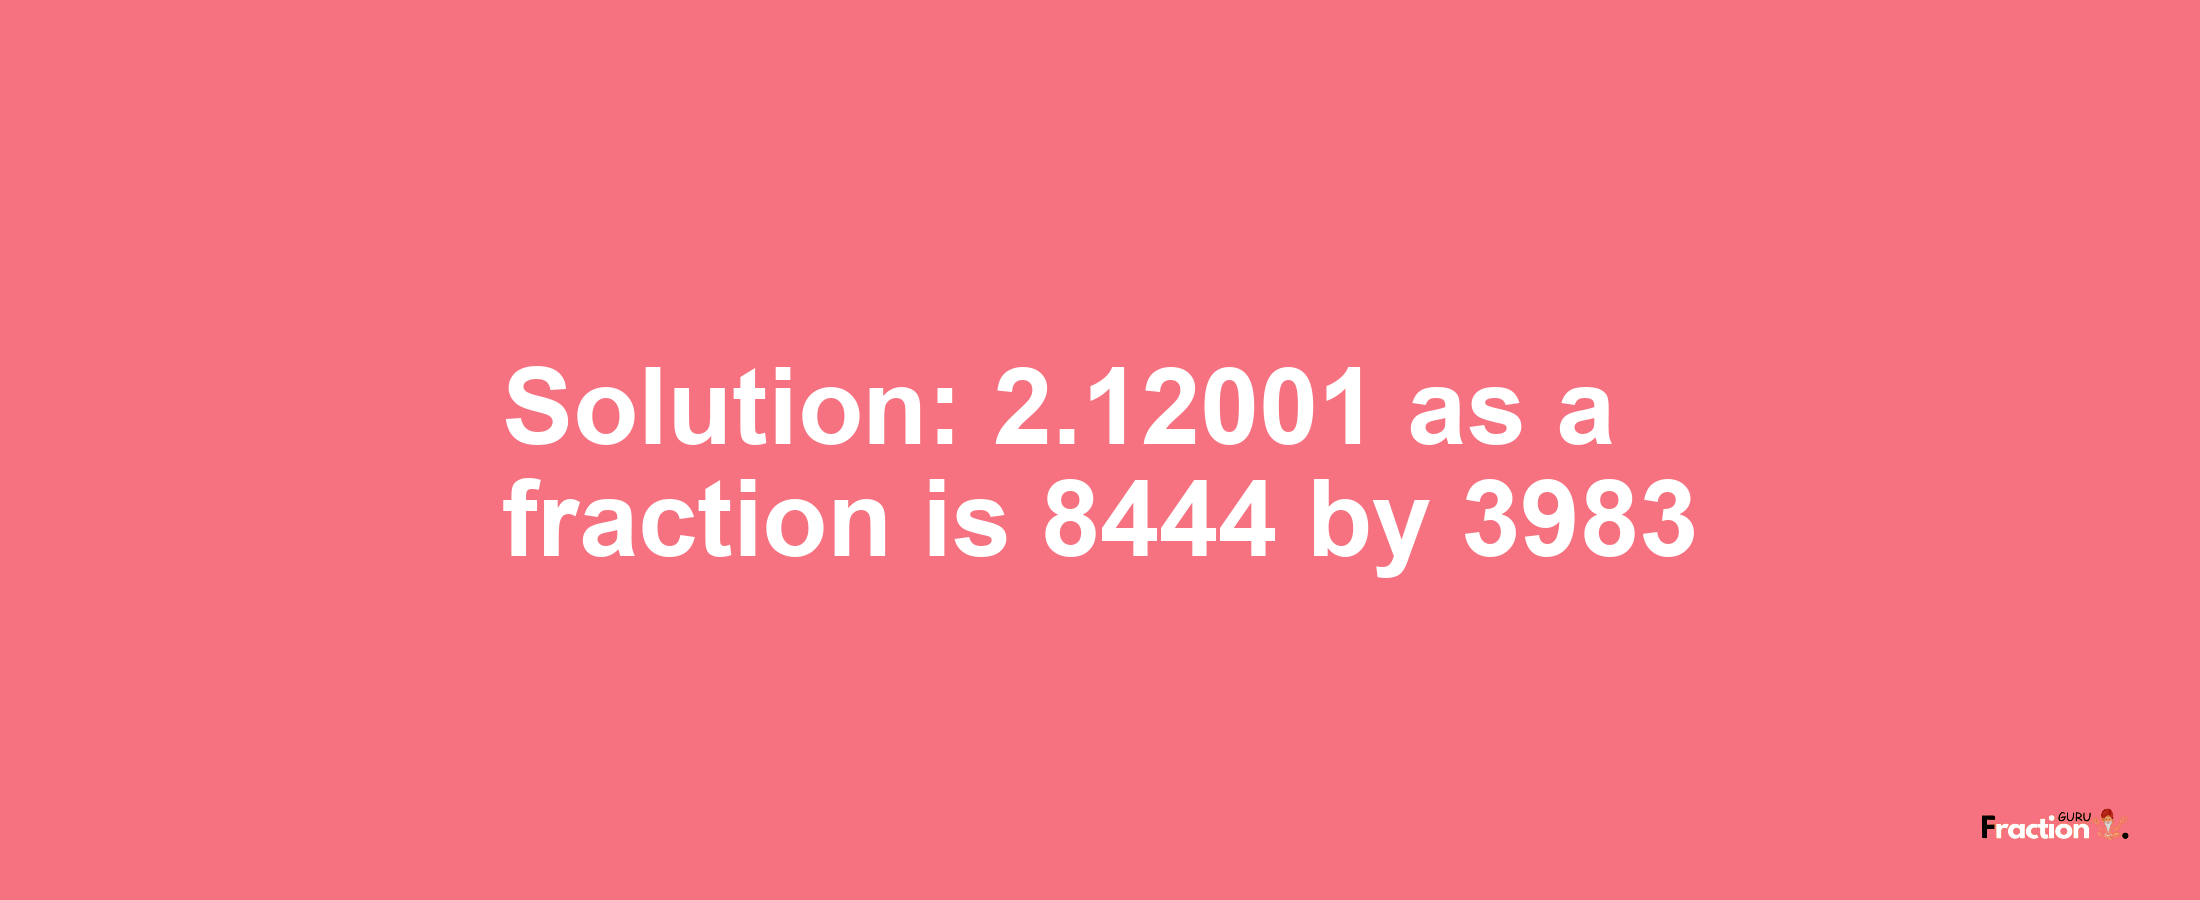 Solution:2.12001 as a fraction is 8444/3983